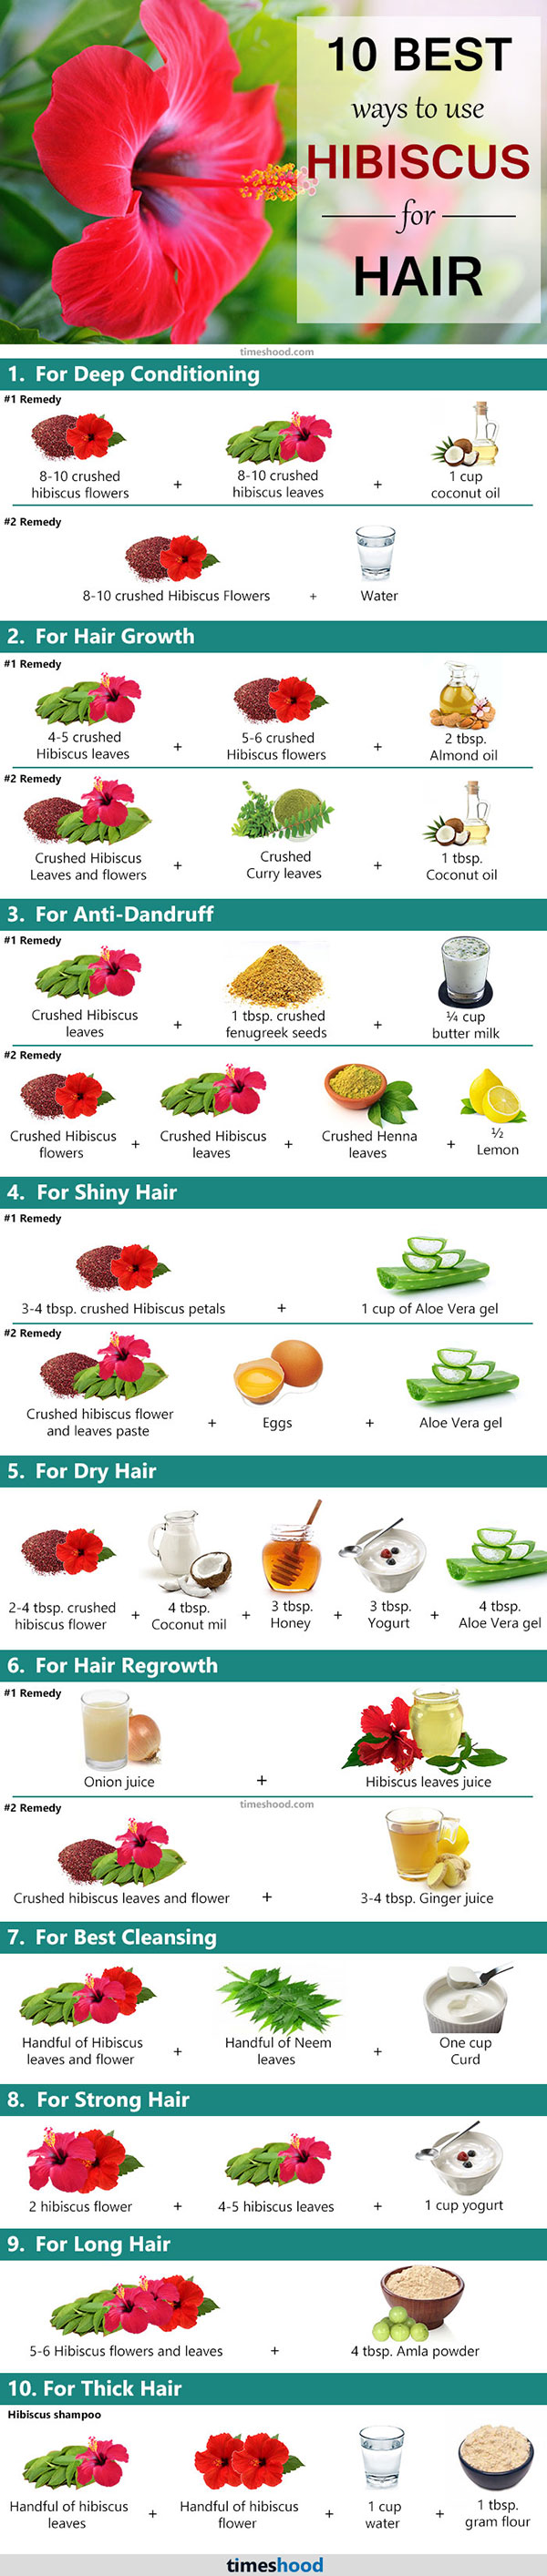 10 Best hibiscus hair mask for all hair type. DIY Hibiscus hair mask for soft, shiny and beautiful hair. How to use hibiscus for hair. Tips to grow hair remedy at home. DIY Remedy for long thick and shiny hair.